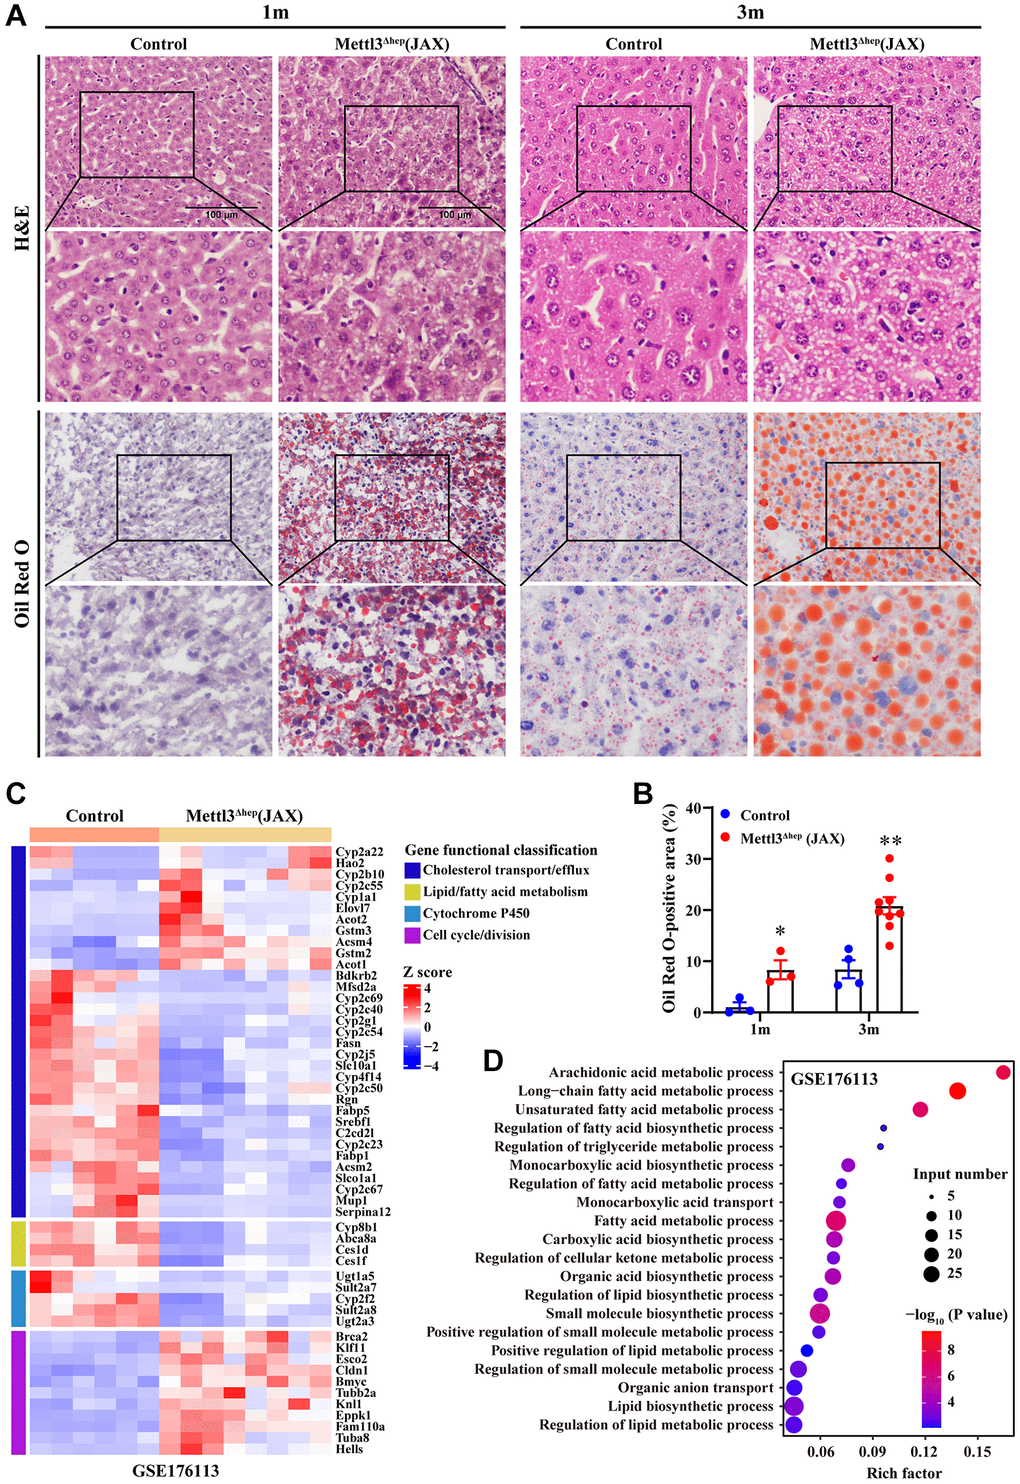 Hepatic METTL3 homozygous knockout by Alb-Cre mice (JAX) induces lipid accumulation in mouse hepatocytes. (A) Representative images of H&E (upper panel A) and Oil-Red-O (ORO) (lower panel A) staining of liver sections from control mice and METTL3Δhep mice (JAX) at 1 month and 3 months postnatally. Scale bar = 100 μm. (B) Quantitative analysis of ORO staining-positive areas of frozen liver sections (shown in Figure 7A, lower panel A) relative to total liver section areas. ORO-positive areas were quantified for each of the five random images using ImageJ Software. (C) Heatmap (RNA-seq data deposited in NCBI GEO under the accession number GSE176113 [20]) depicts the differential expression of genes involved in cell cycle, hepatic lipid metabolism and cytochrome P450. In the cluster heatmap, class comparison and hierarchical clustering of differentially expressed genes (DEGs) involved in cell cycle, hepatic lipid metabolism and cytochrome P450 were performed between control mice and METTL3Δhep mice (JAX). Genes with increased and reduced expressions are shown in red and blue, respectively. (D) GO analysis of up- and downregulated genes derived from RNA-seq data deposited in NCBI GEO under the accession number GSE176113 [20] related with cell cycle, hepatic lipid metabolism and cytochrome P450 in the liver of control mice and METTL3Δhep mice (JAX).